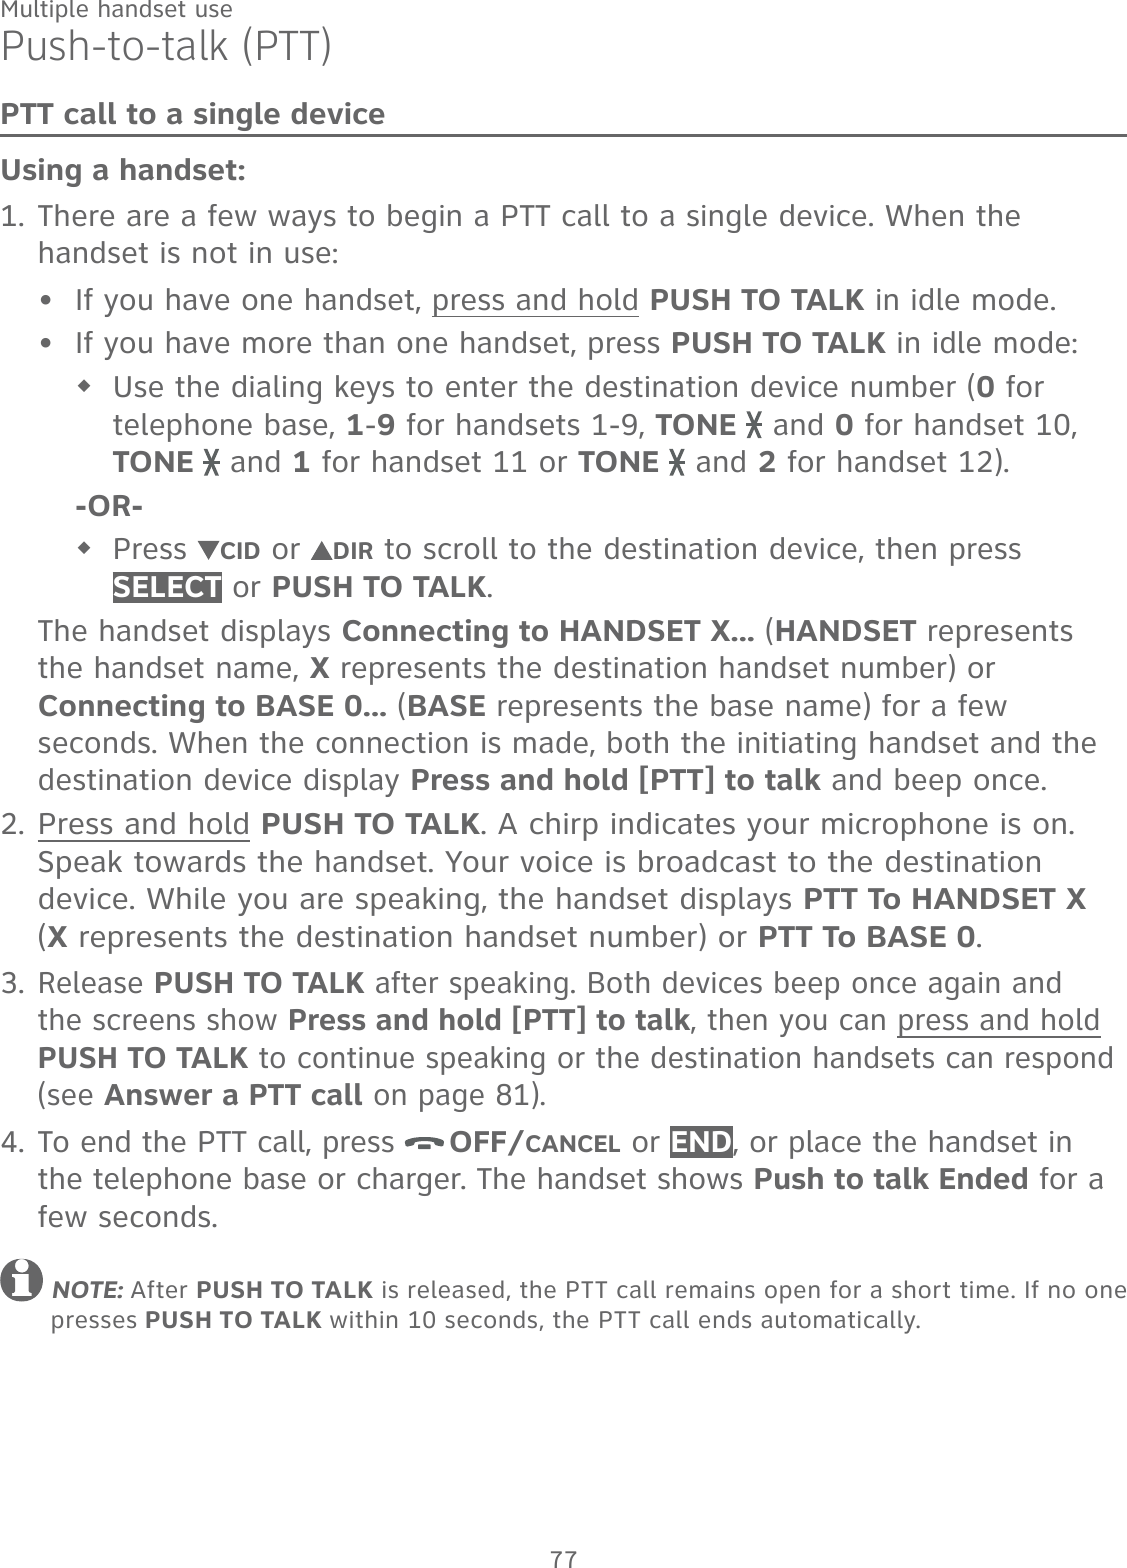 77Multiple handset usePush-to-talk (PTT)PTT call to a single deviceUsing a handset:There are a few ways to begin a PTT call to a single device. When the handset is not in use:If you have one handset, press and hold PUSH TO TALK in idle mode.If you have more than one handset, press PUSH TO TALK in idle mode: Use the dialing keys to enter the destination device number (0 for telephone base, 1-9 for handsets 1-9, TONE   and 0 for handset 10, TONE   and 1 for handset 11 or TONE   and 2 for handset 12). -OR-Press  CID or  DIR to scroll to the destination device, then press SELECT or PUSH TO TALK.The handset displays Connecting to HANDSET X... (HANDSET represents the handset name, X represents the destination handset number) or Connecting to BASE 0... (BASE represents the base name) for a few seconds. When the connection is made, both the initiating handset and the destination device display Press and hold [PTT] to talk and beep once.Press and hold PUSH TO TALK. A chirp indicates your microphone is on. Speak towards the handset. Your voice is broadcast to the destination device. While you are speaking, the handset displays PTT To HANDSET X  (X represents the destination handset number) or PTT To BASE 0.Release PUSH TO TALK after speaking. Both devices beep once again and the screens show Press and hold [PTT] to talk, then you can press and hold PUSH TO TALK to continue speaking or the destination handsets can respond (see Answer a PTT call on page 81).To end the PTT call, press  OFF/CANCEL or END, or place the handset in the telephone base or charger. The handset shows Push to talk Ended for a few seconds. NOTE: After PUSH TO TALK is released, the PTT call remains open for a short time. If no one presses PUSH TO TALK within 10 seconds, the PTT call ends automatically.1.••2.3.4.